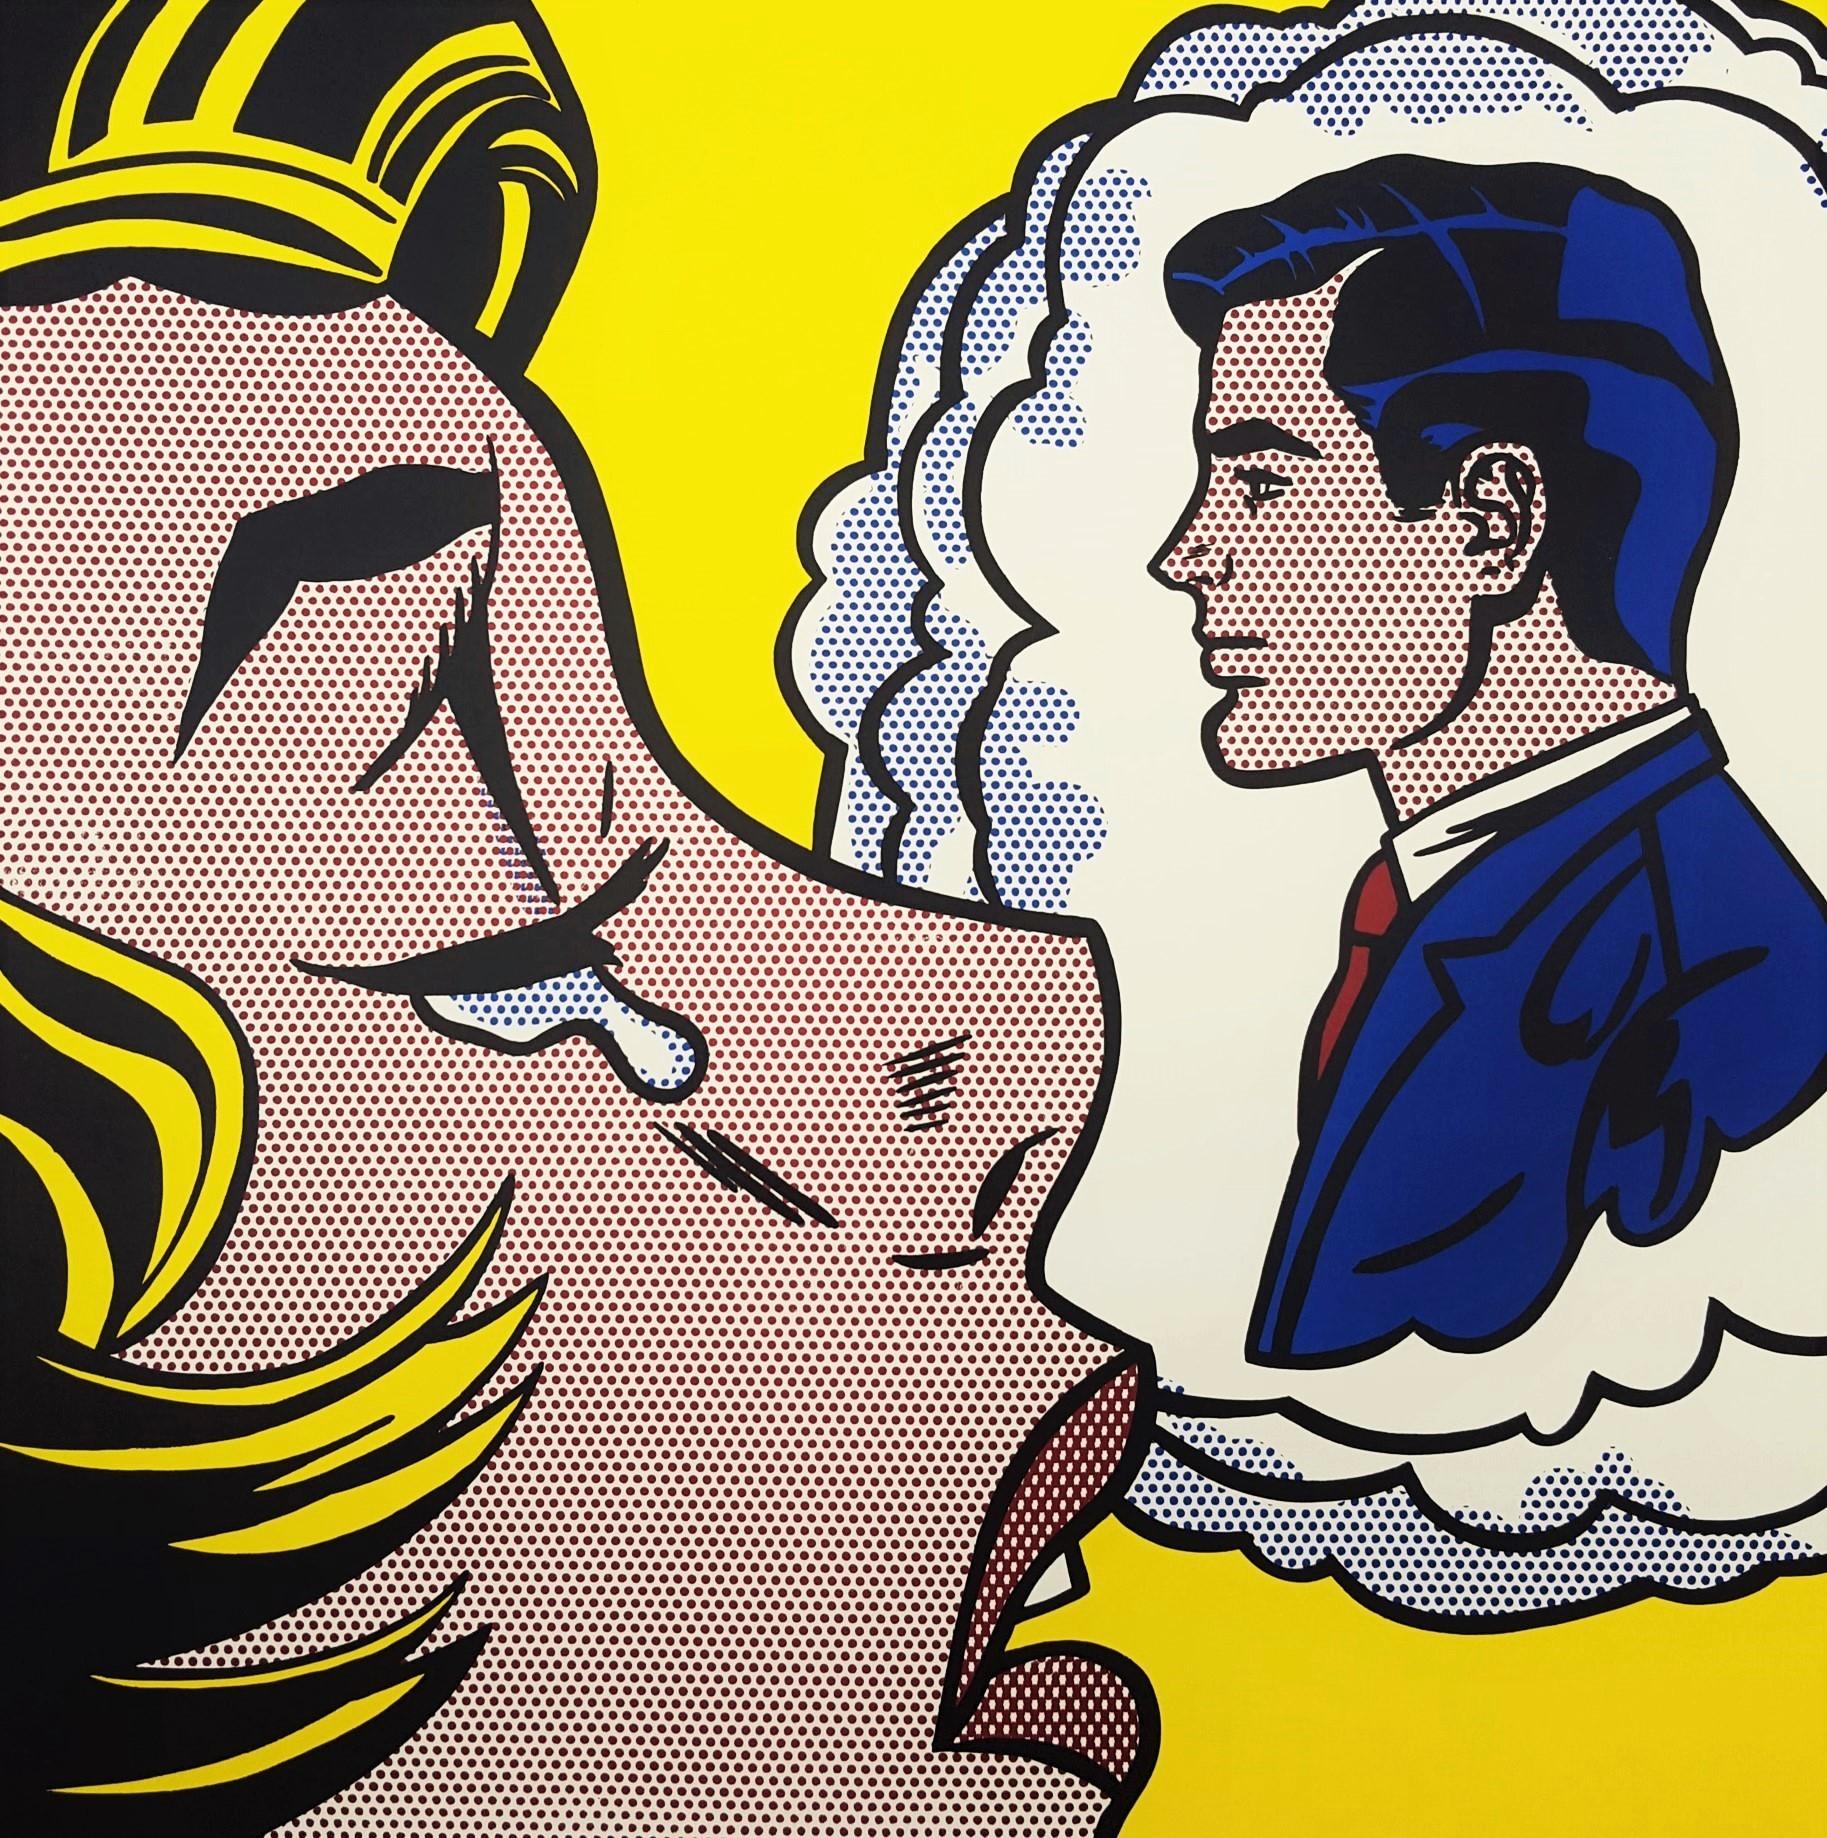 Yale University Art Gallery (Thinking of Him) Poster - Print by (after) Roy Lichtenstein